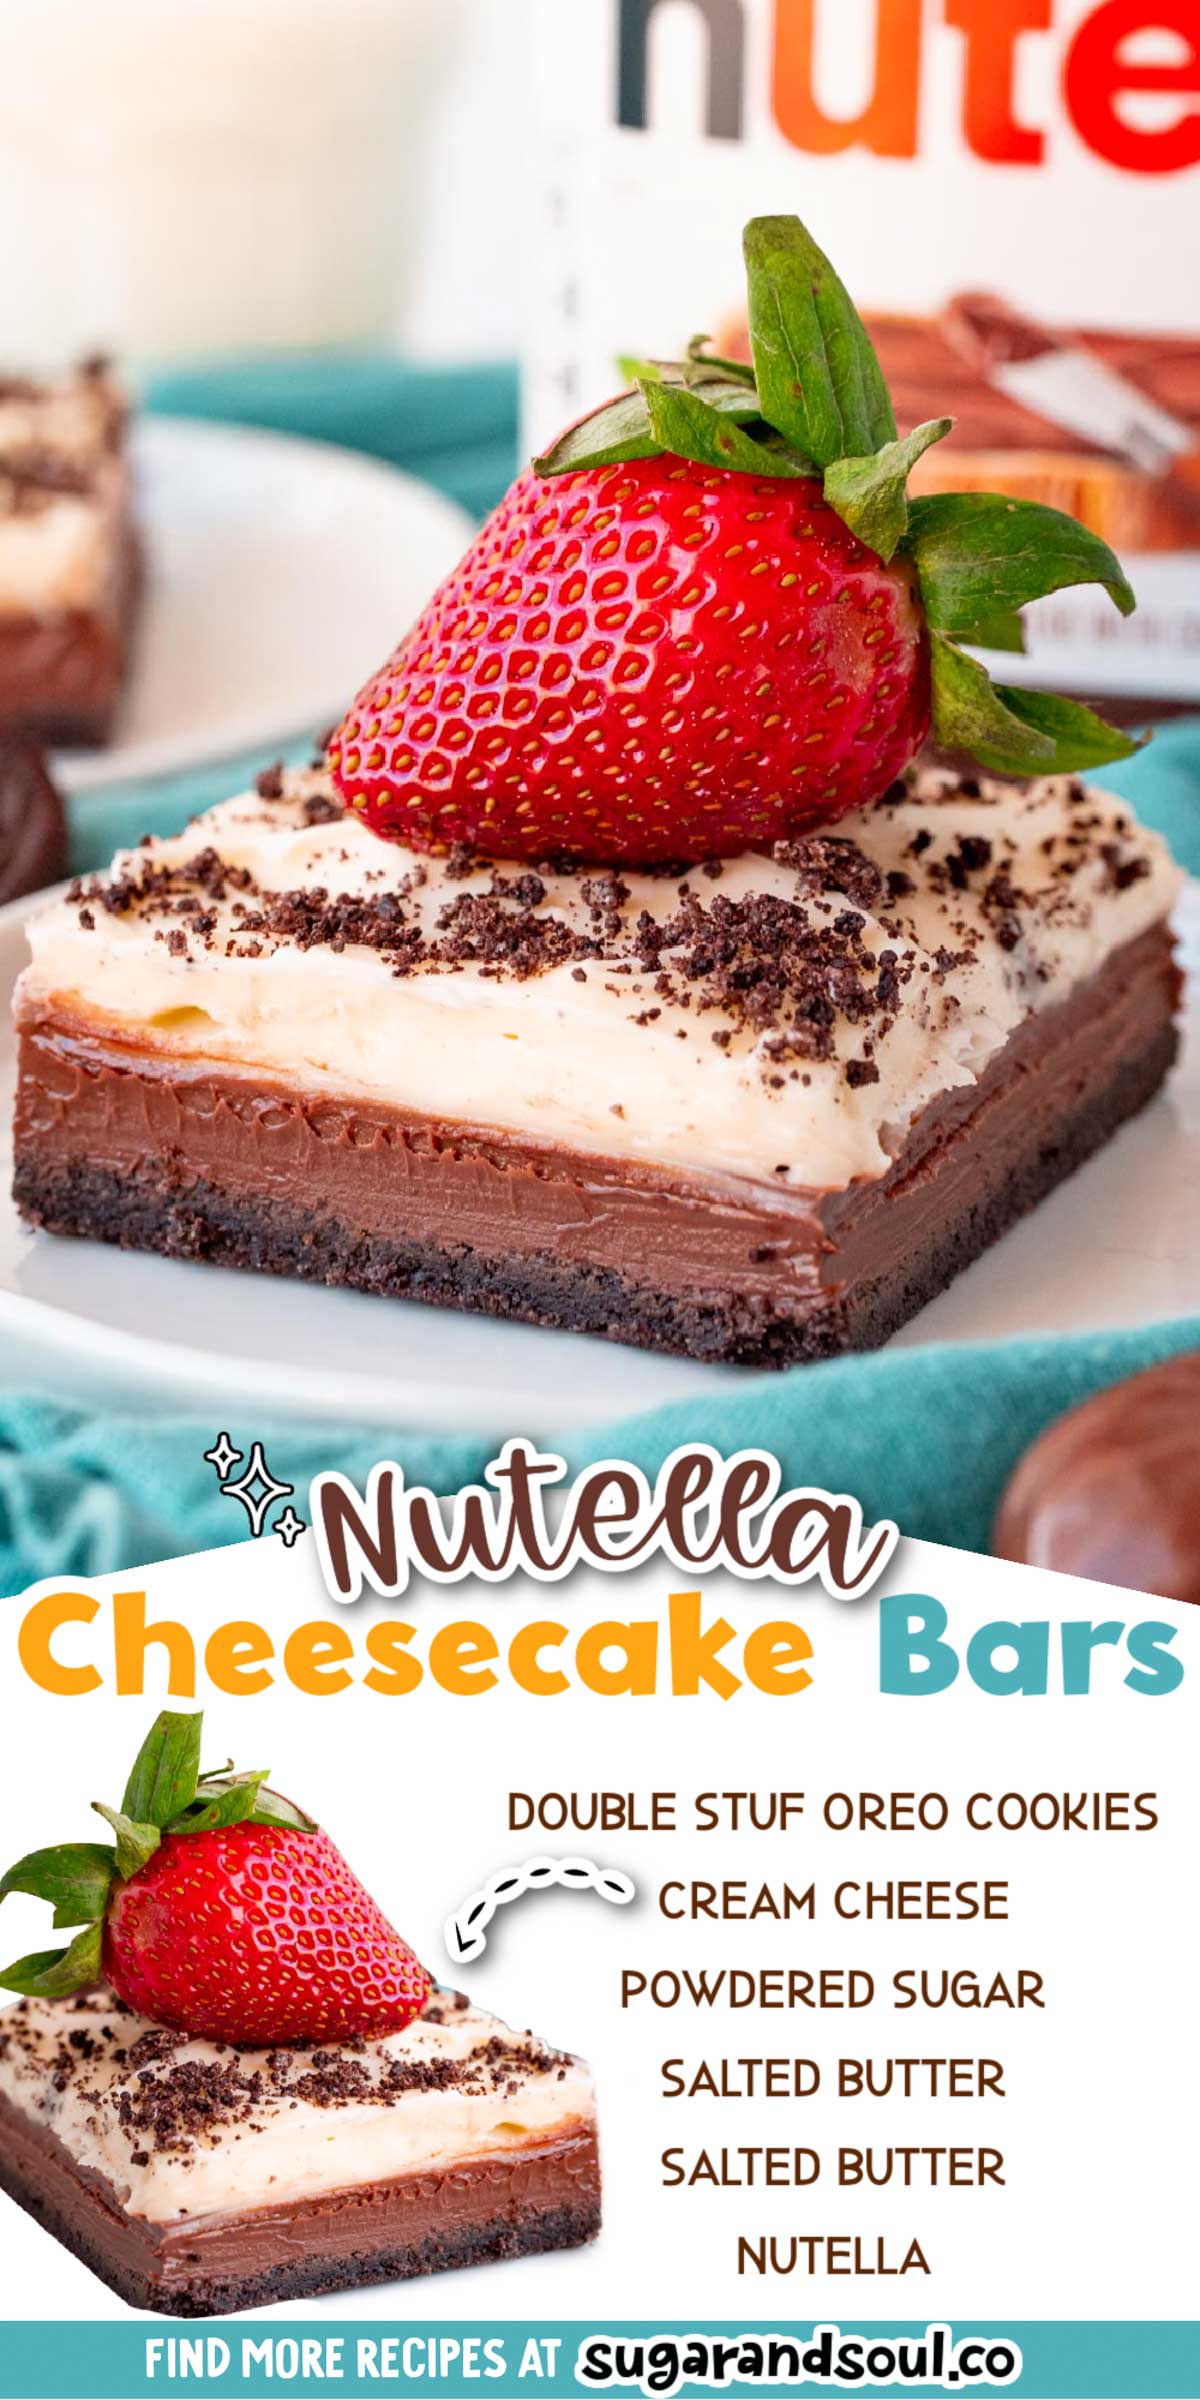 No Bake Nutella Cheesecake Bars have an Oreo crust with a layer of Nutella that's topped with a 3-ingredient creamy cheesecake layer! Prep this sweet treat in only 15 minutes! via @sugarandsoulco